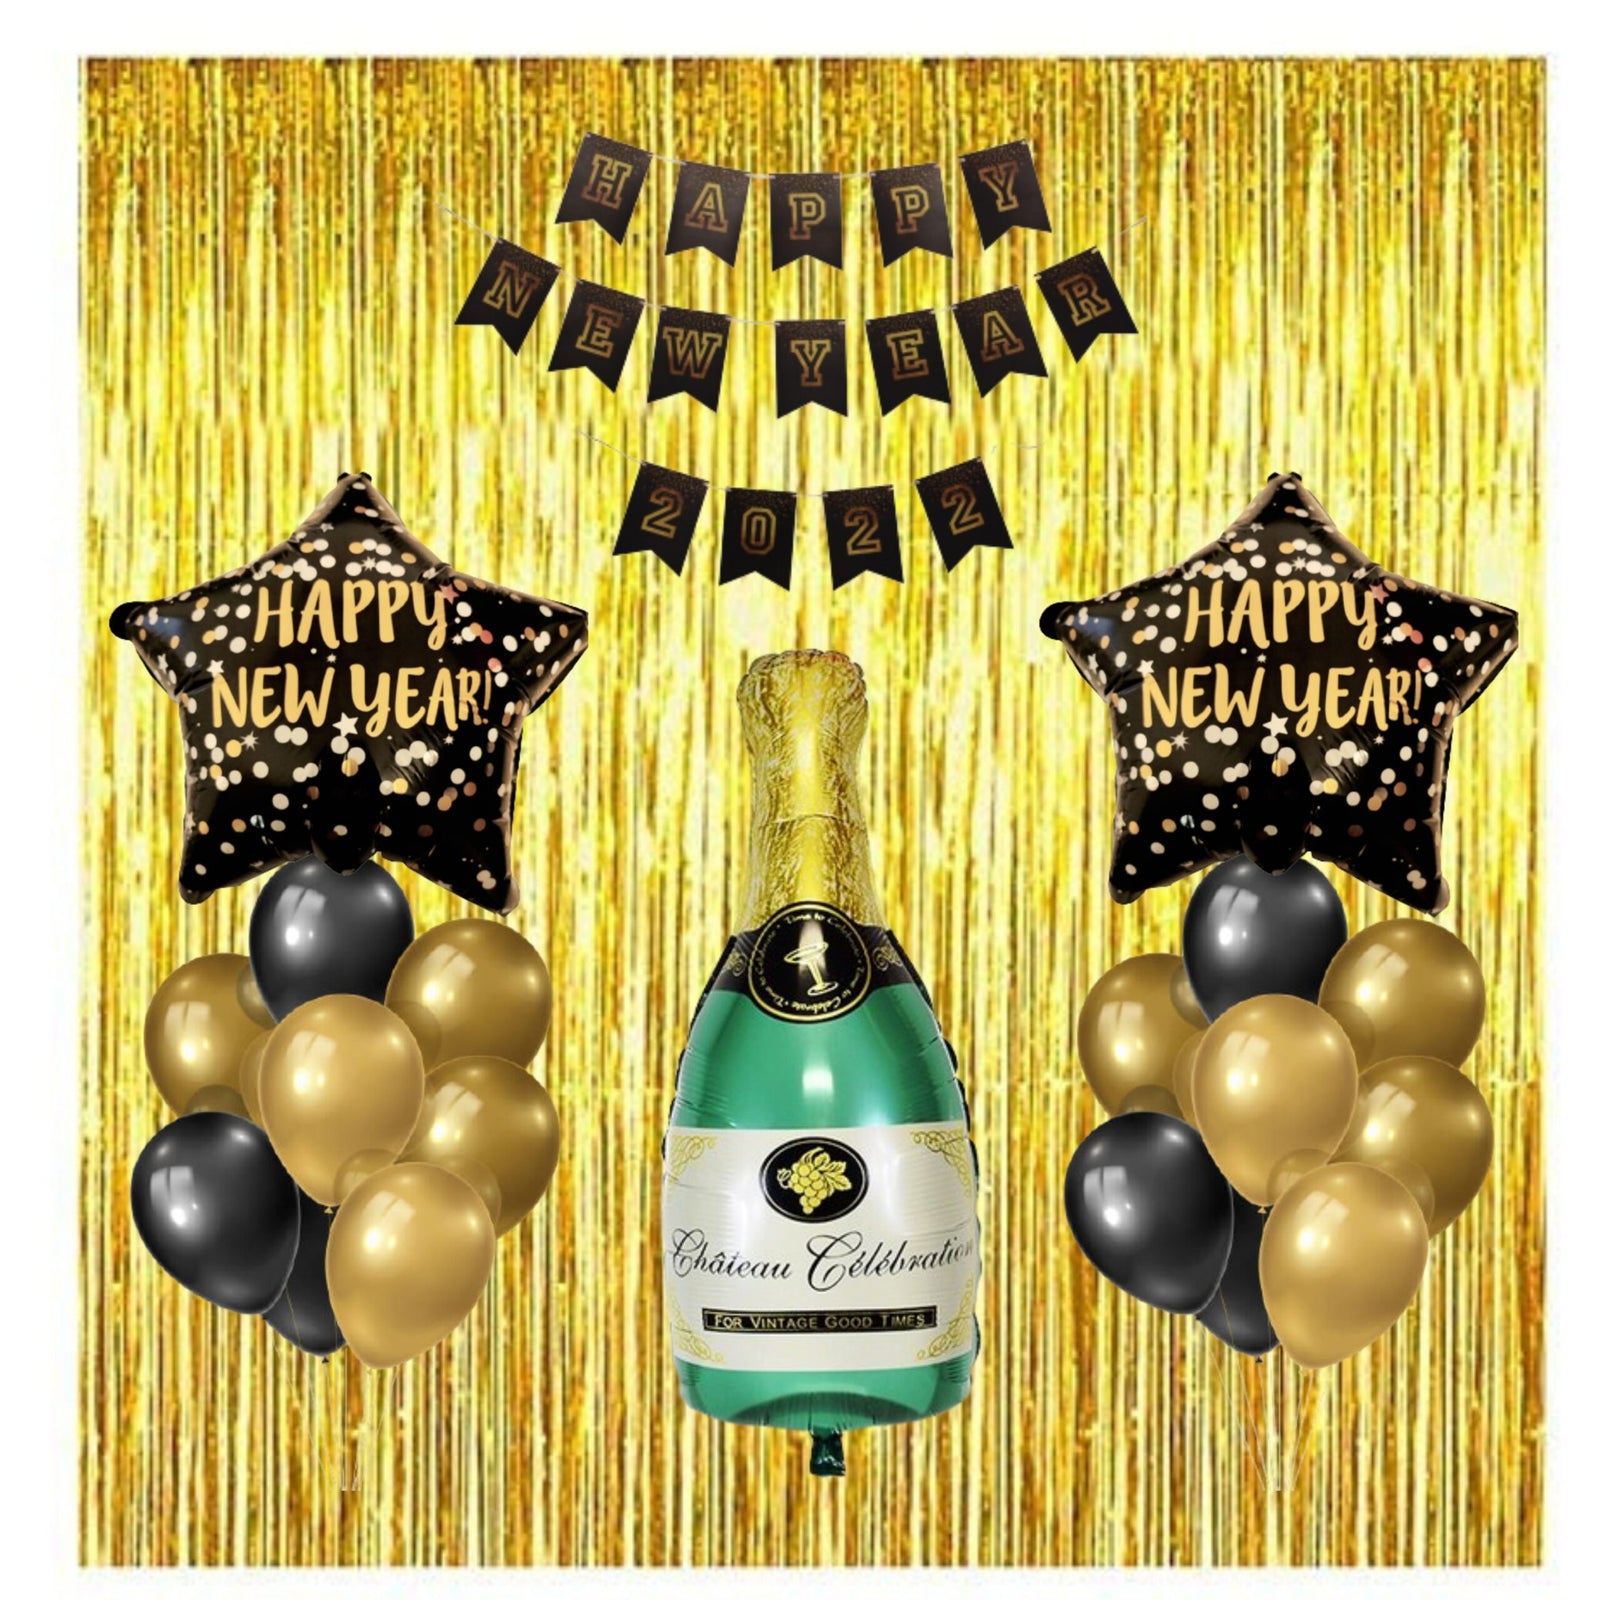 Happy New Year Banner for Decorations 2023 – Black and Gold Letters Banner, Golden Foil Curtain & Large Size Champagne and Latex Balloons (58 pcs )